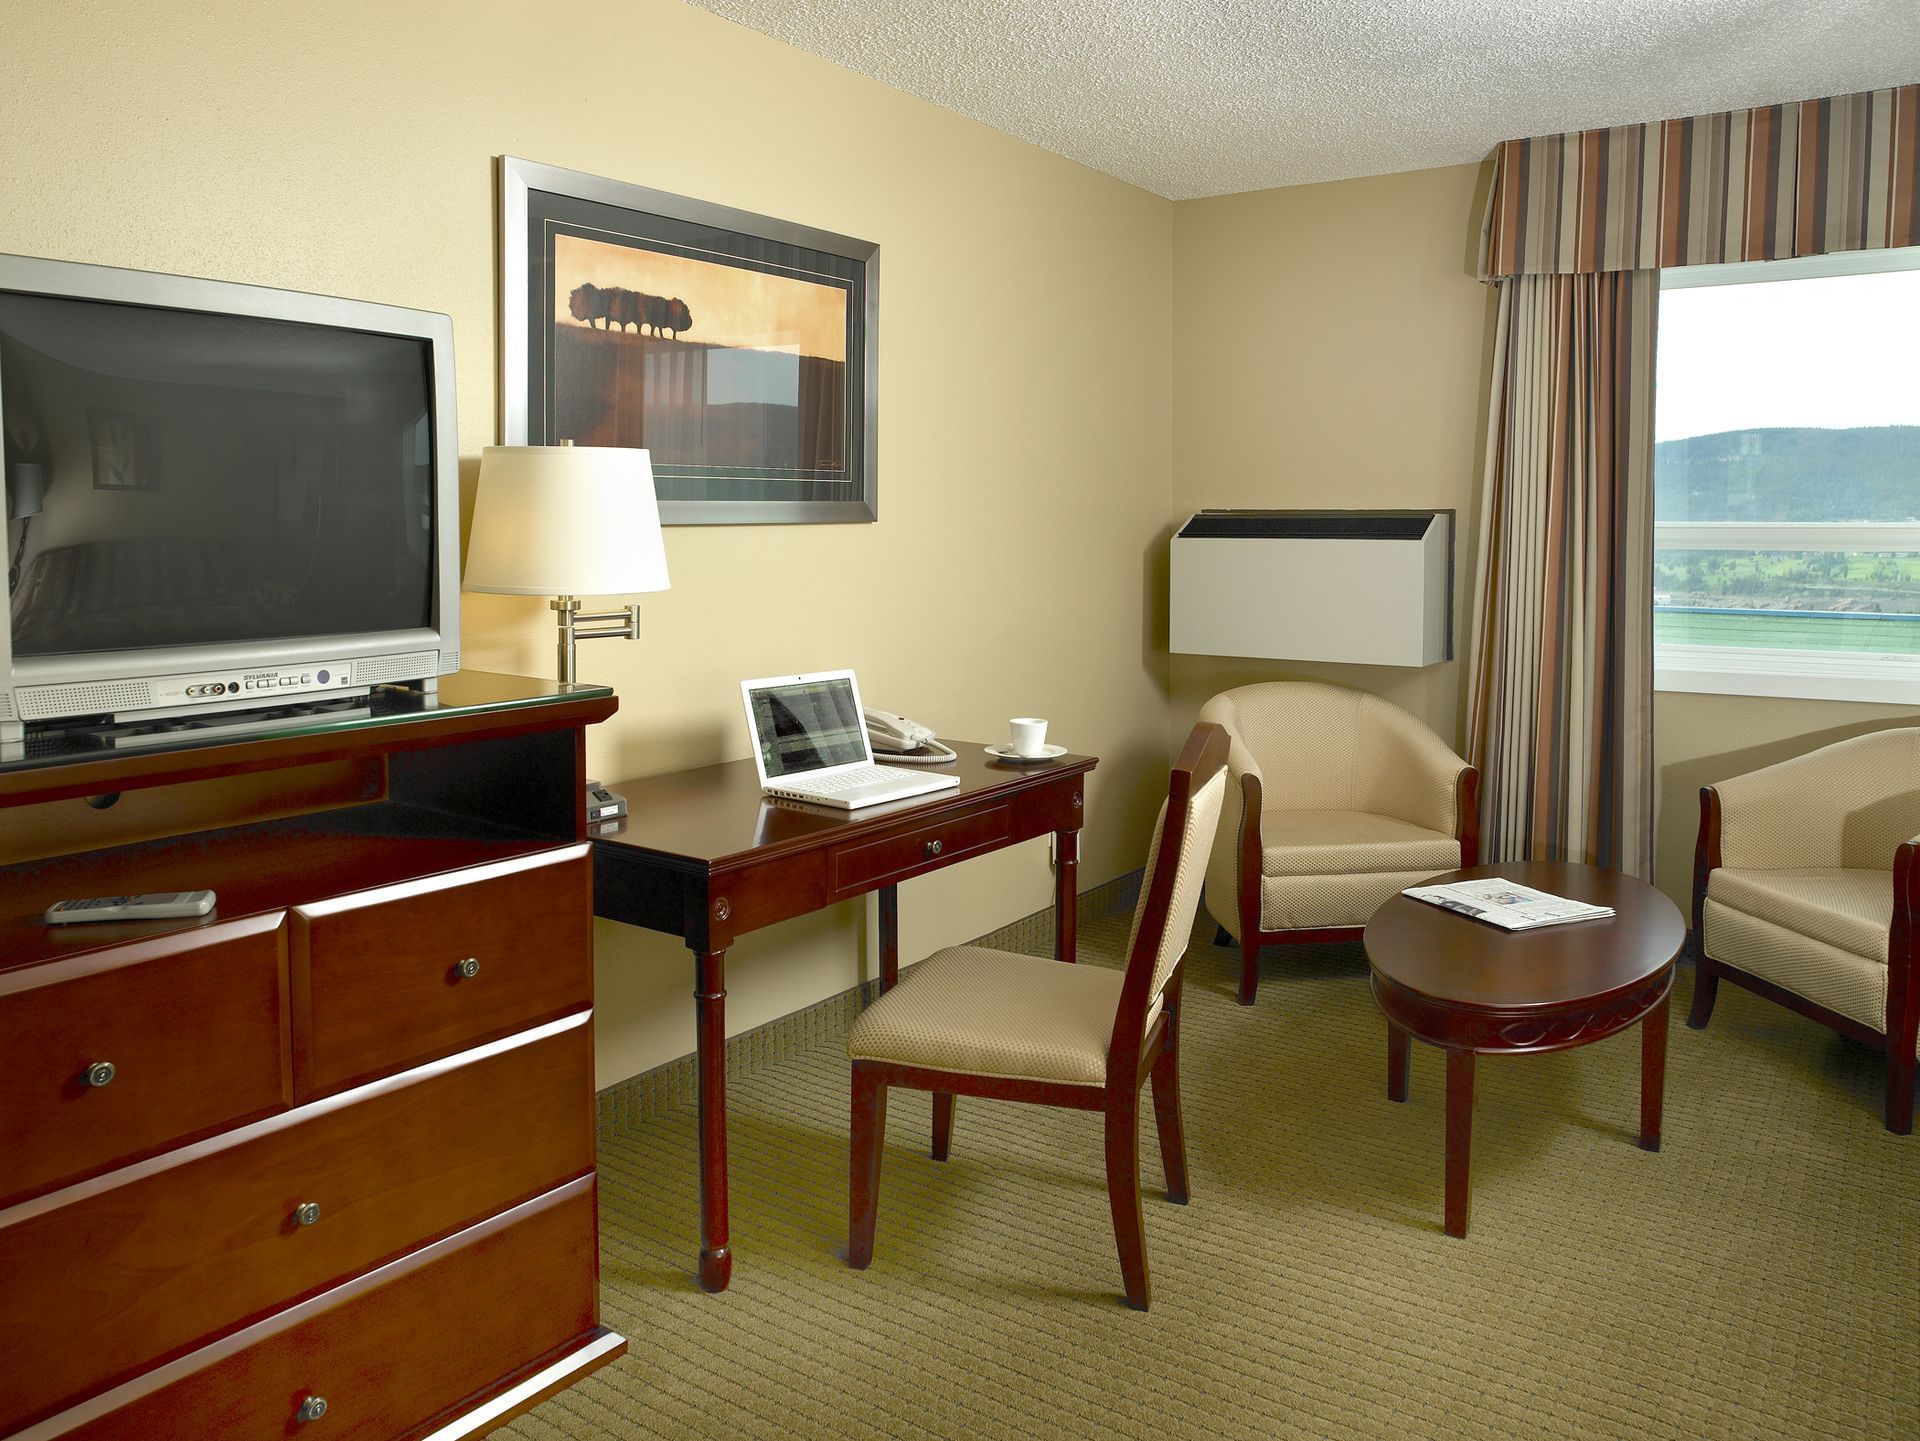 TV and desk in hotel room with window